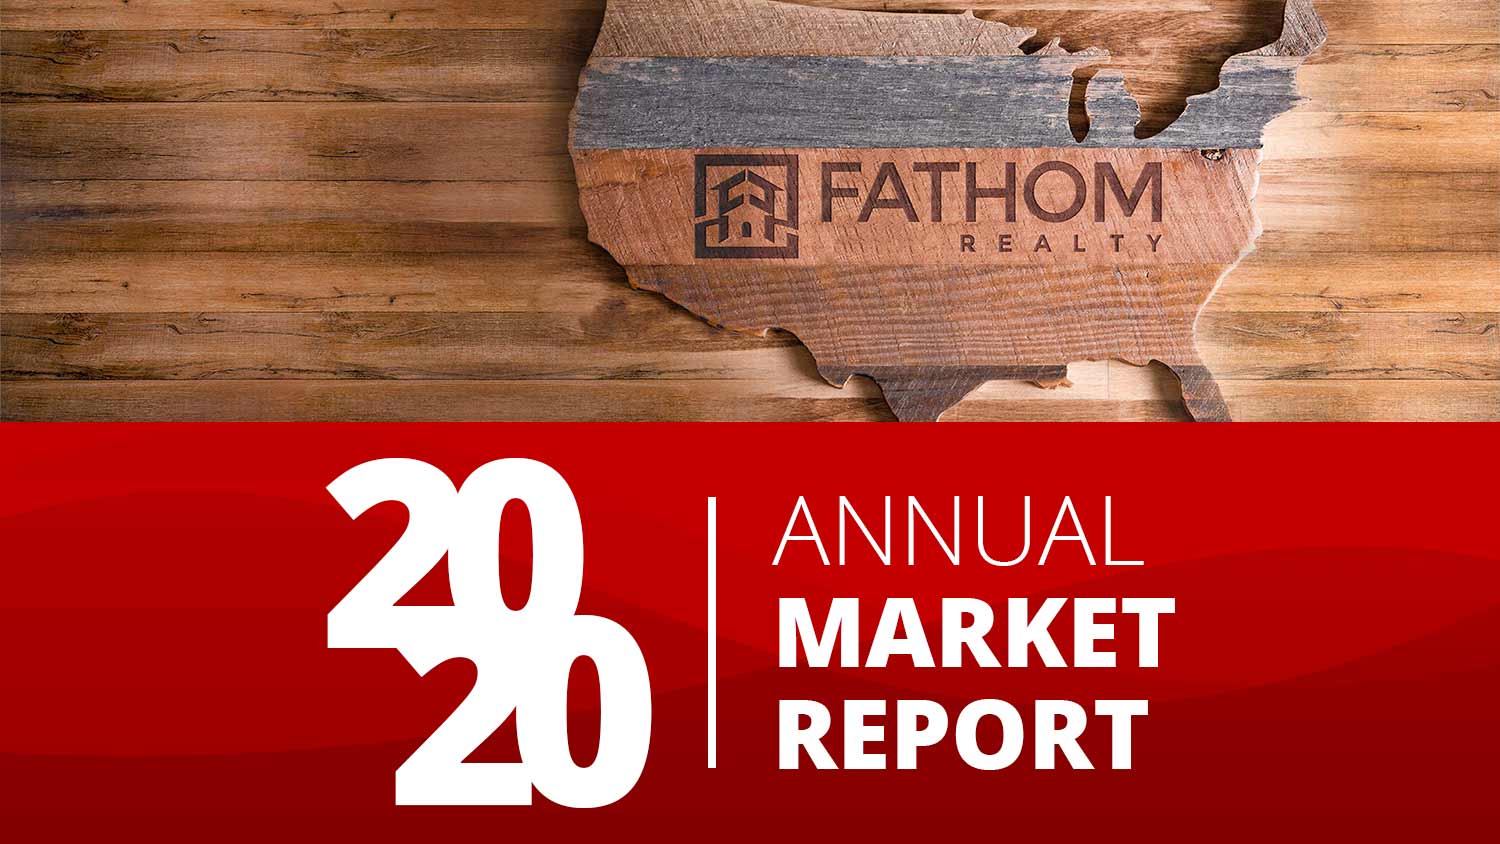 Featured image for “Fathom Annual Market Report 2020”